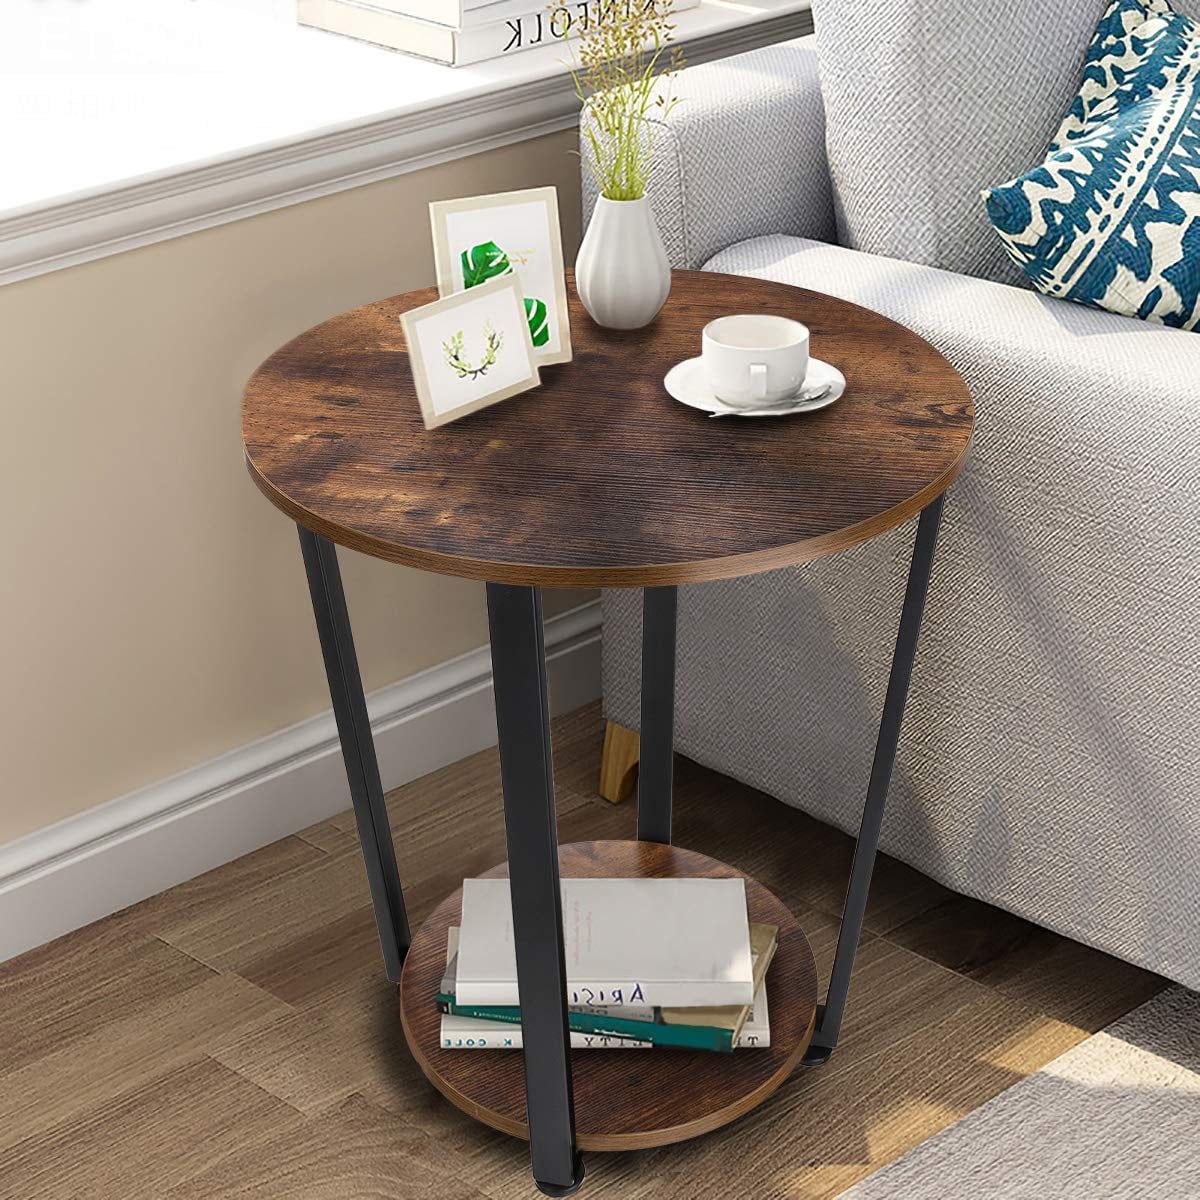 Zoepeng Small Round 2 Tier Wooden Side End Table For Small Spaces Throughout Wood Coffee Tables With 2 Tier Storage (Gallery 16 of 20)